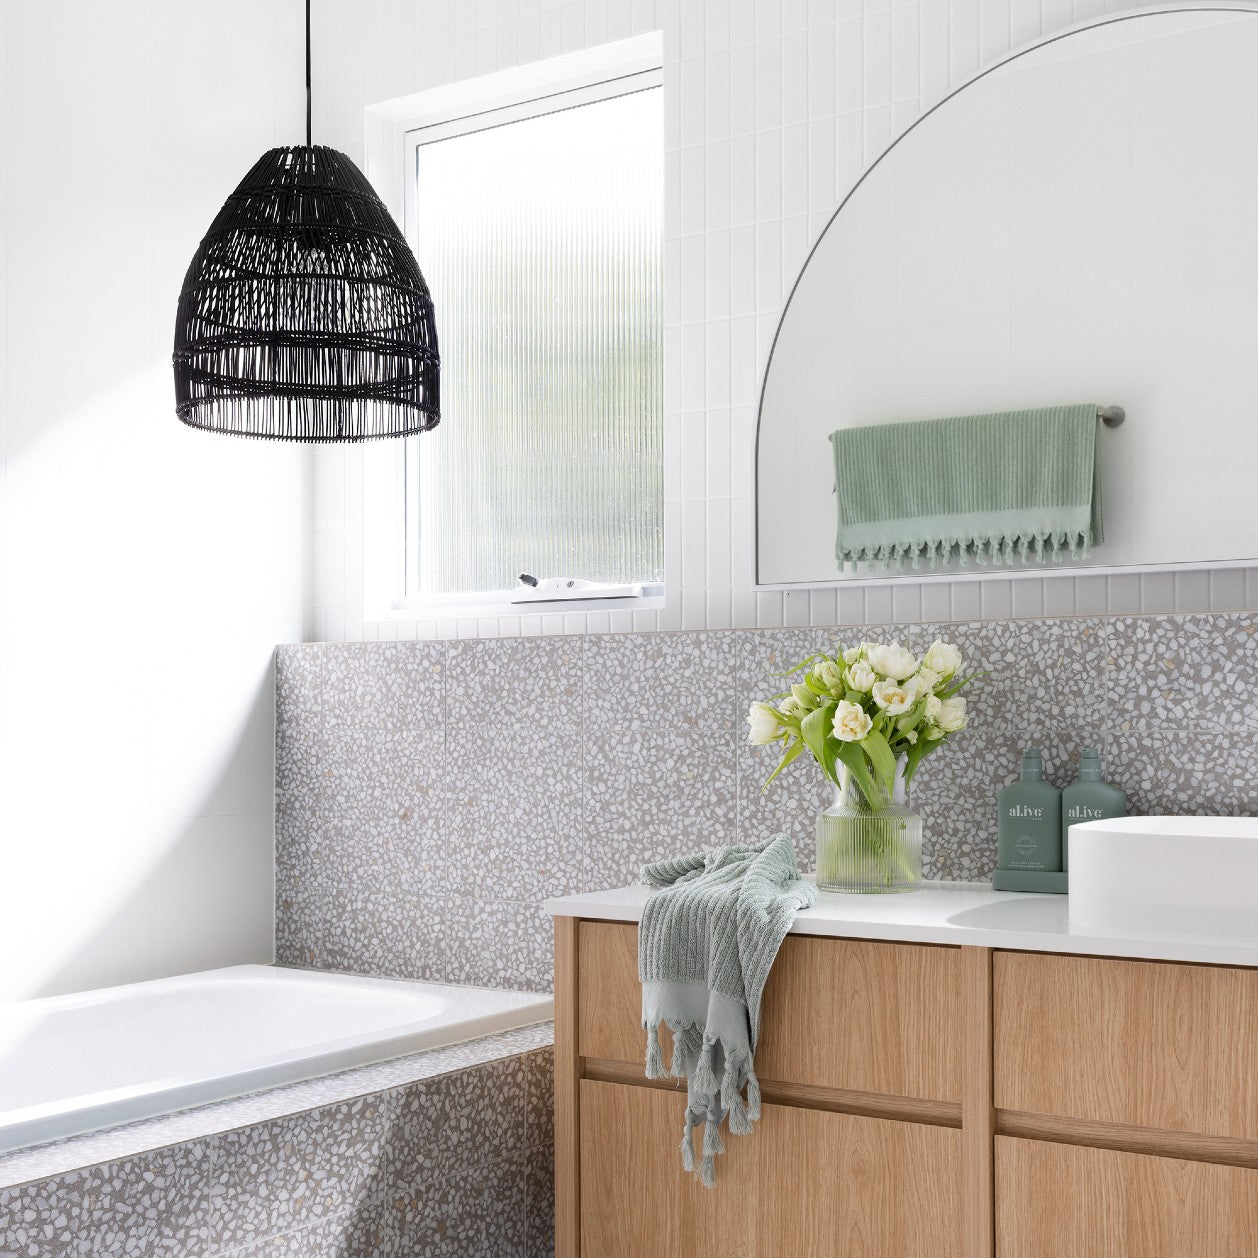 black rattan pendant light hangs above a bath in a grey terrazo tiled bathroom with accents of sage green.